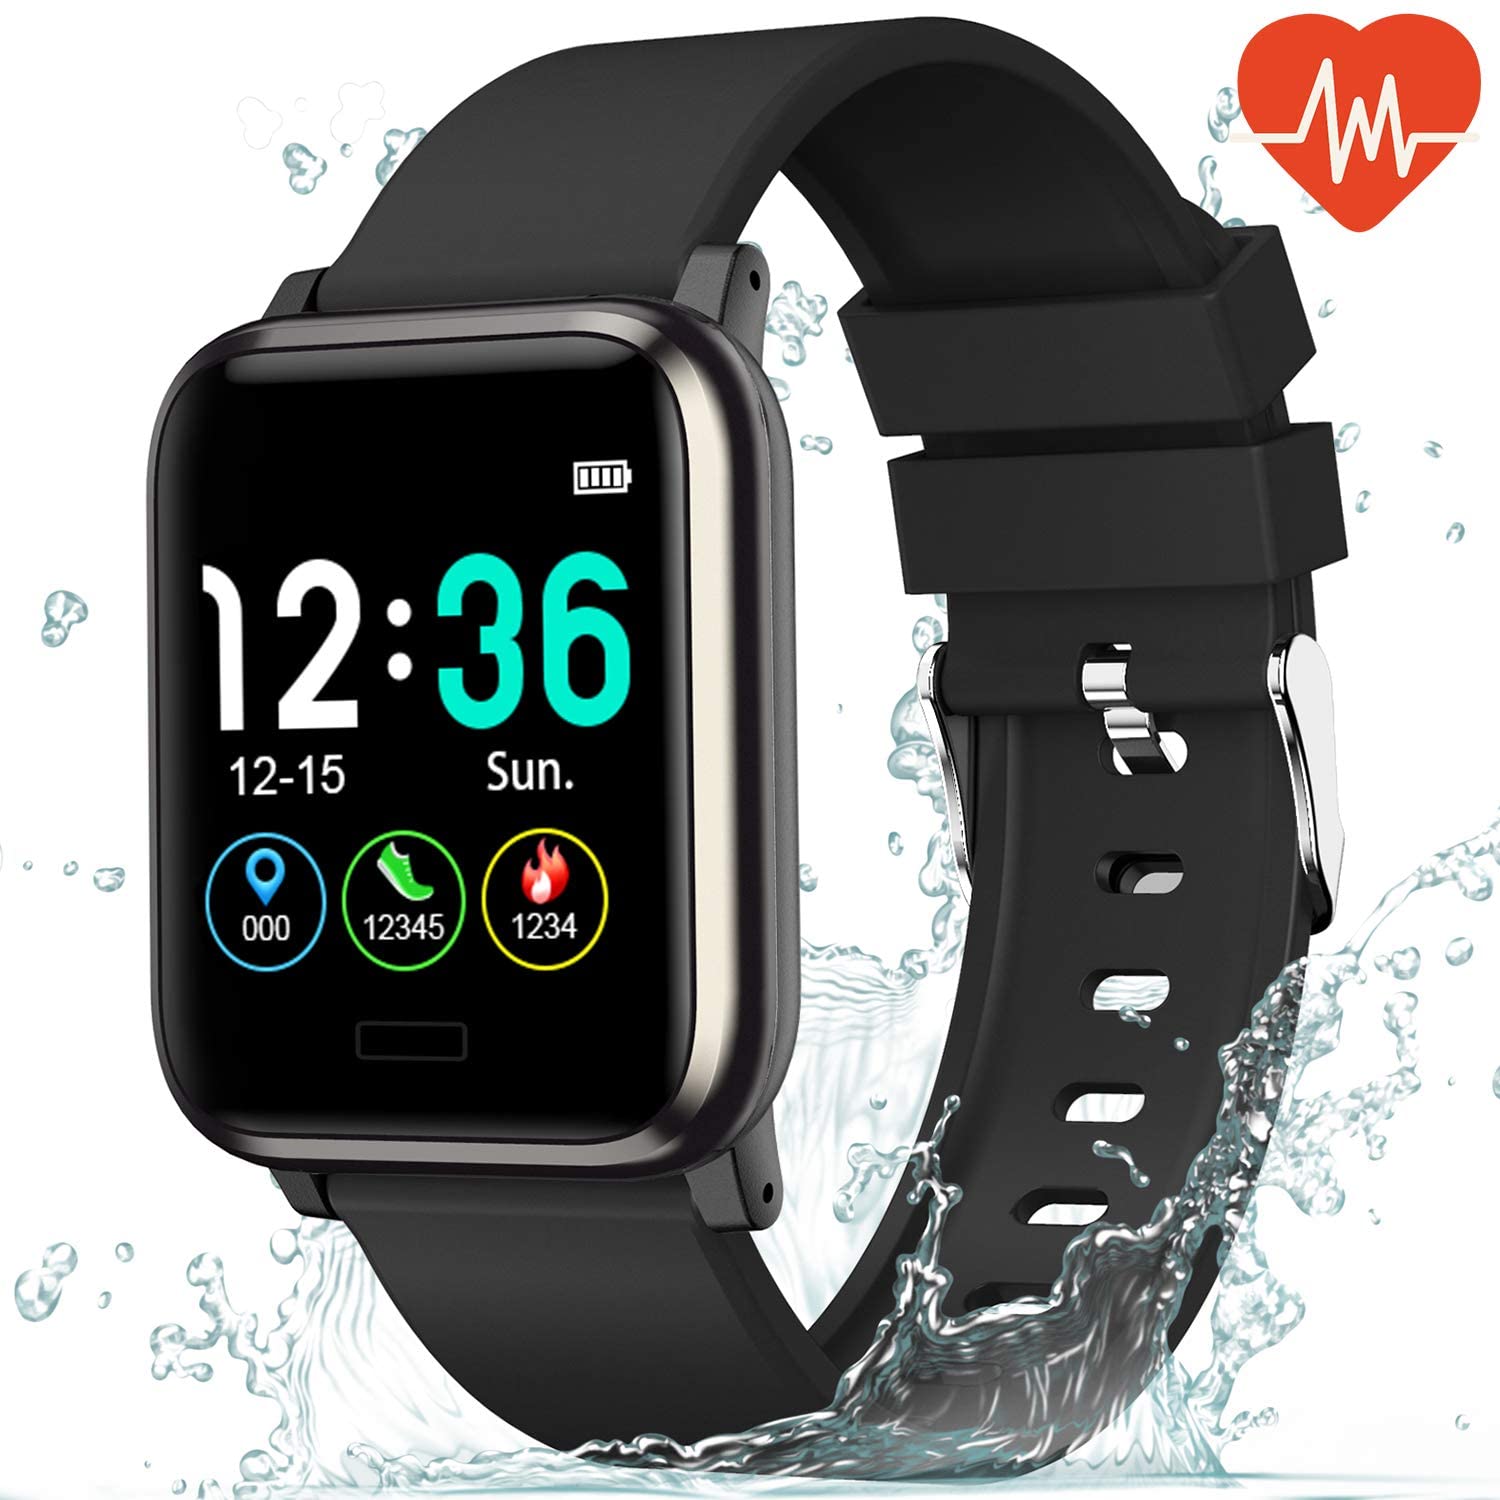 L8star Fitness Tracker Heart Rate Monitor-1.3'' - e4cents